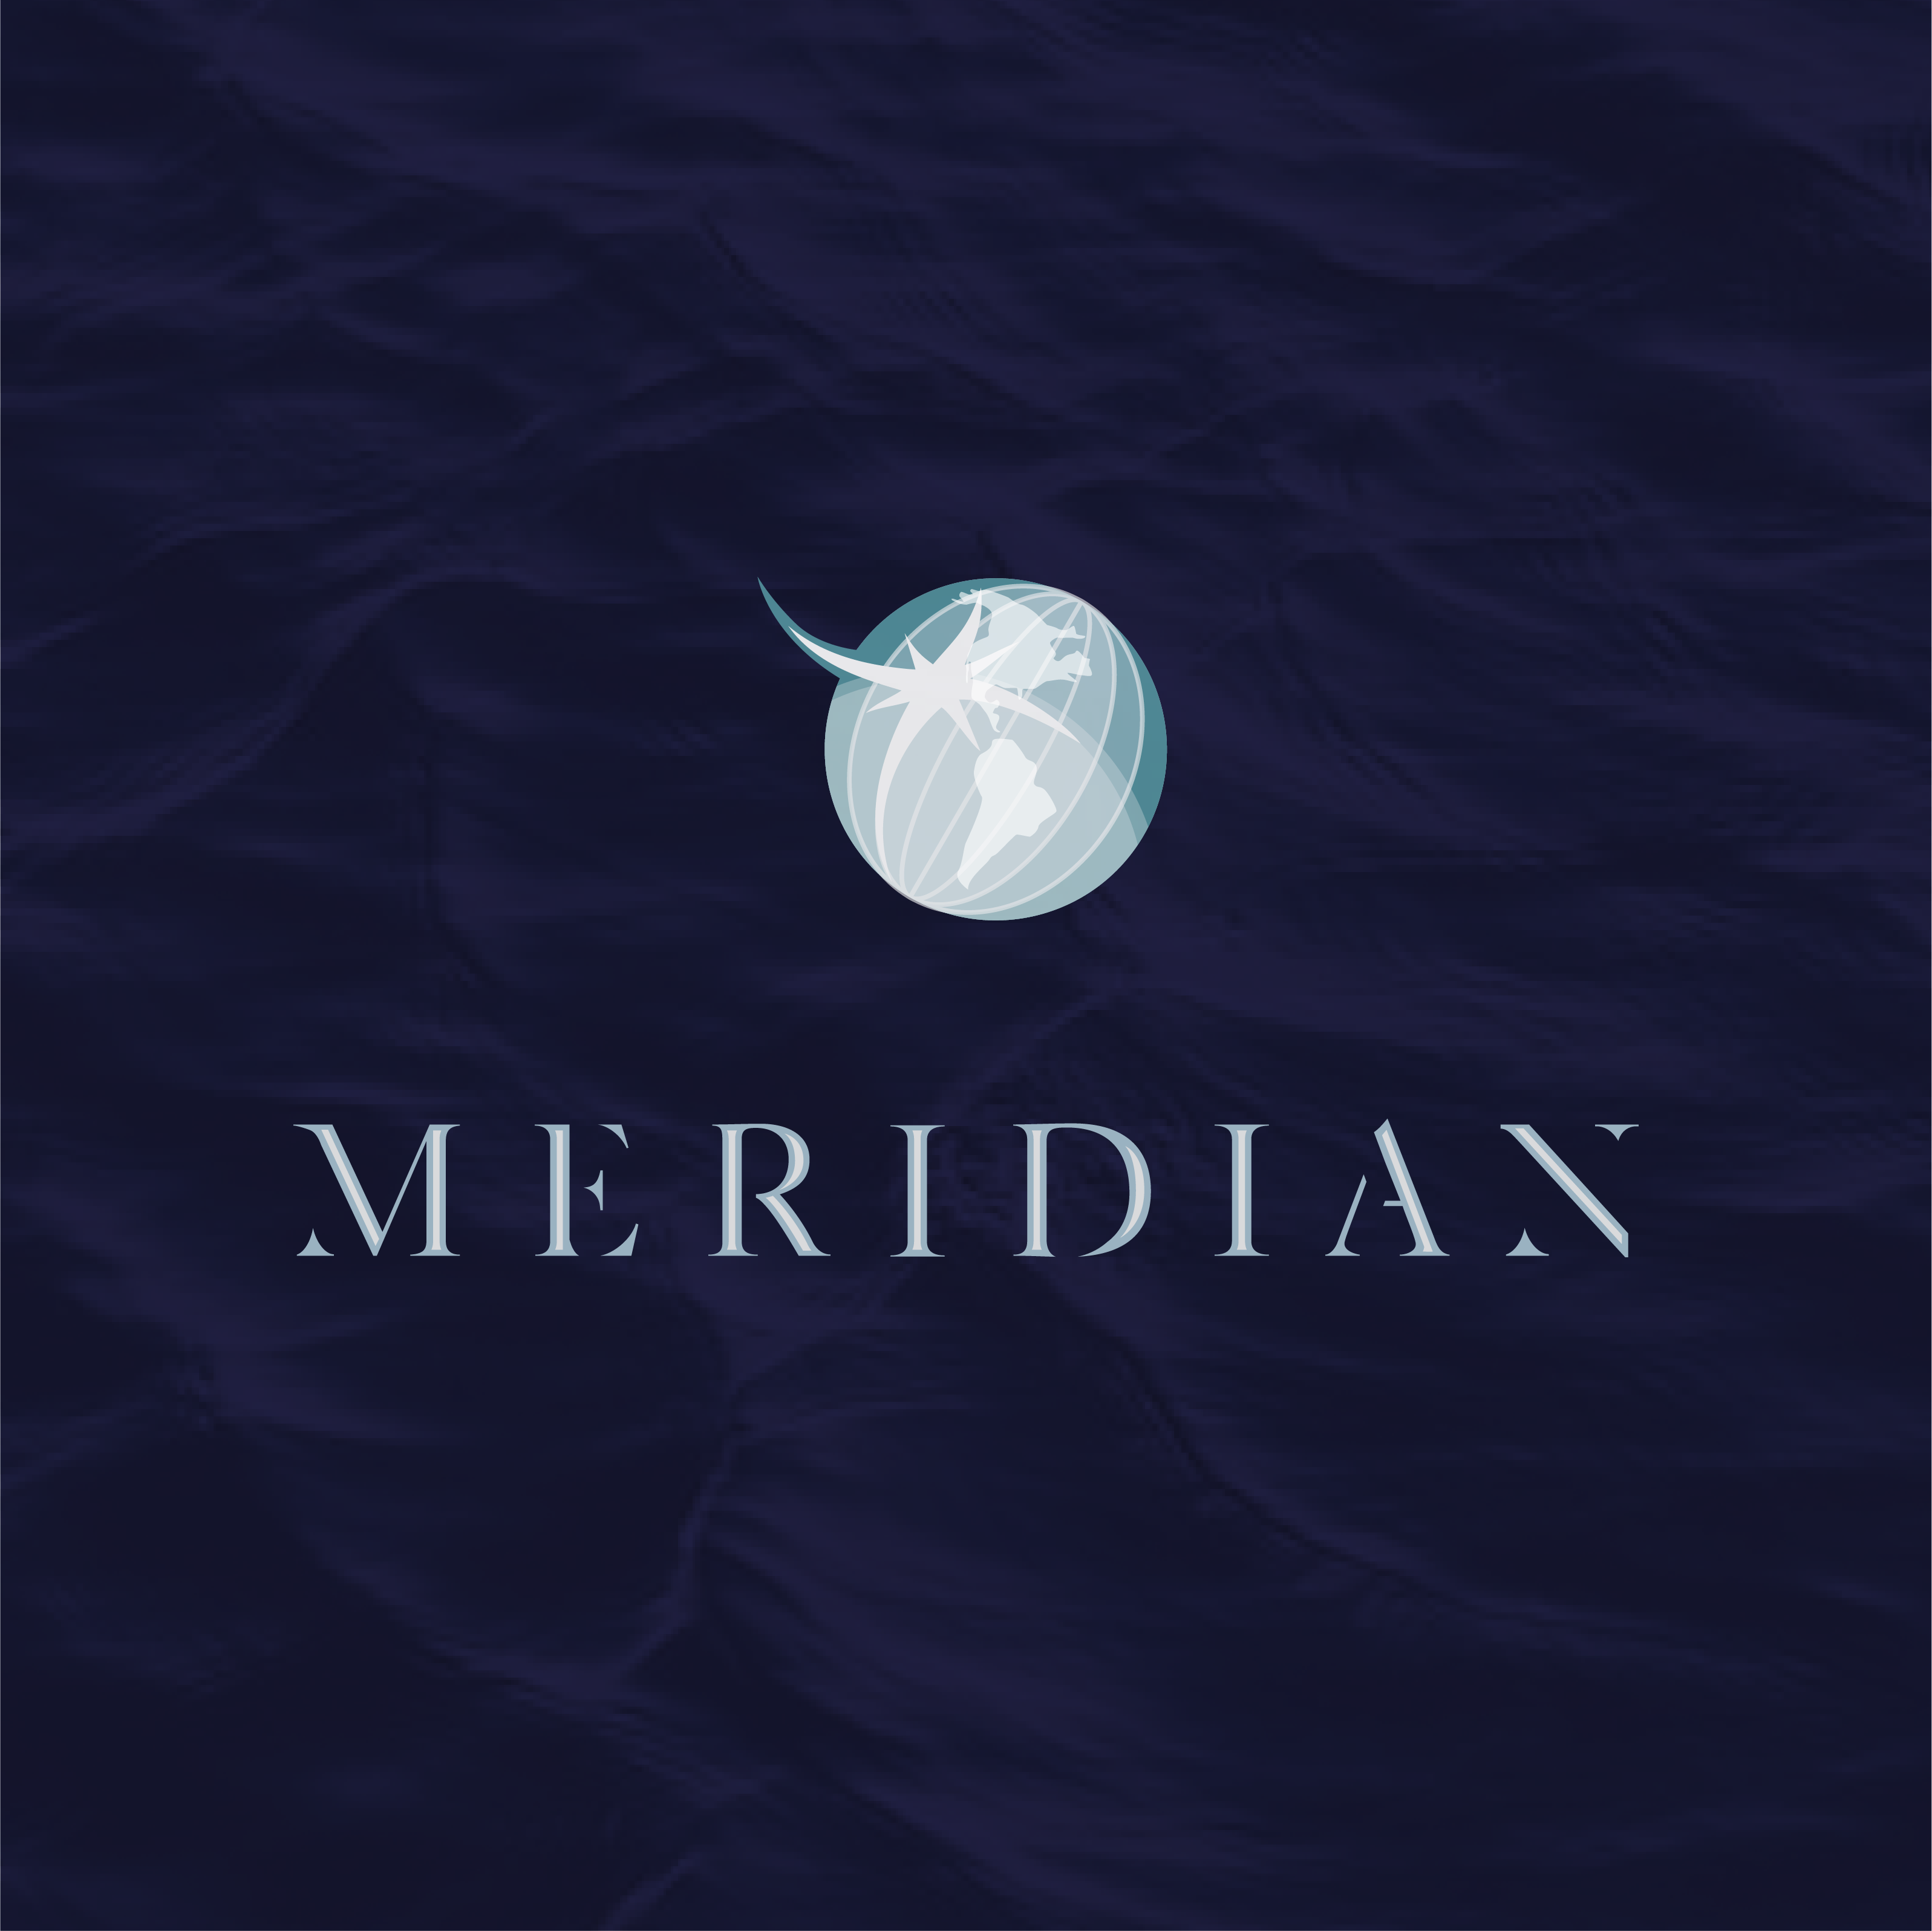 Logo treatment reading MERIDIAN with a globe above it